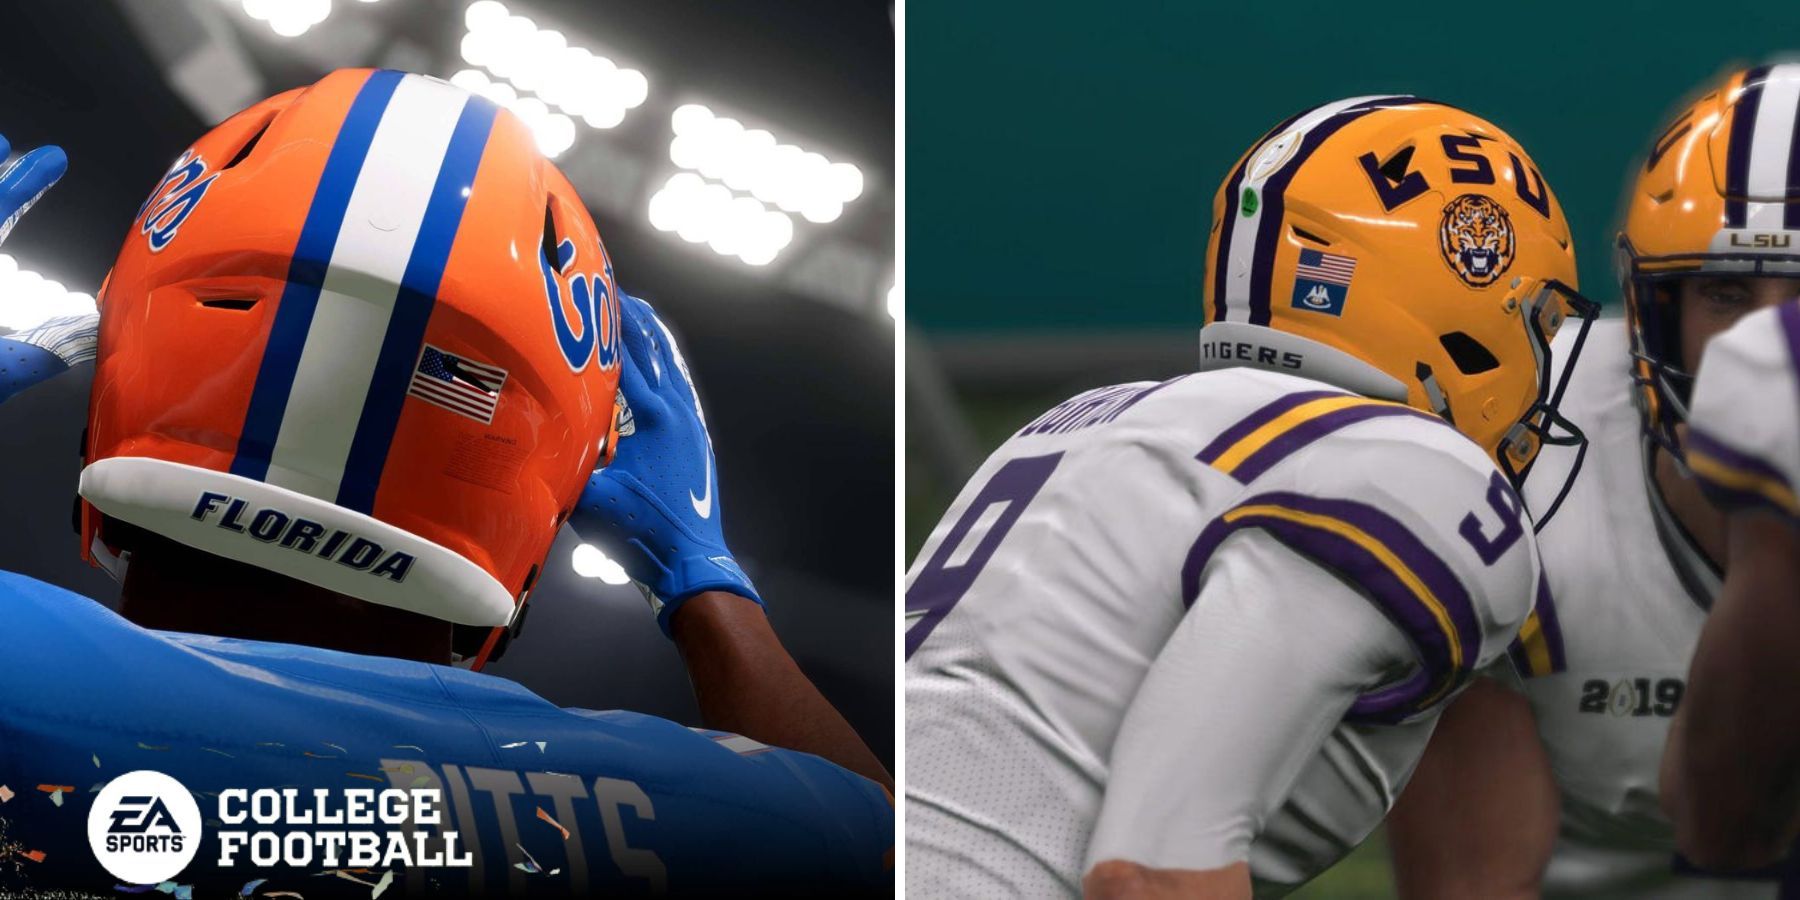 Why EA Sports' College Football Featuring School Traditions is a Game